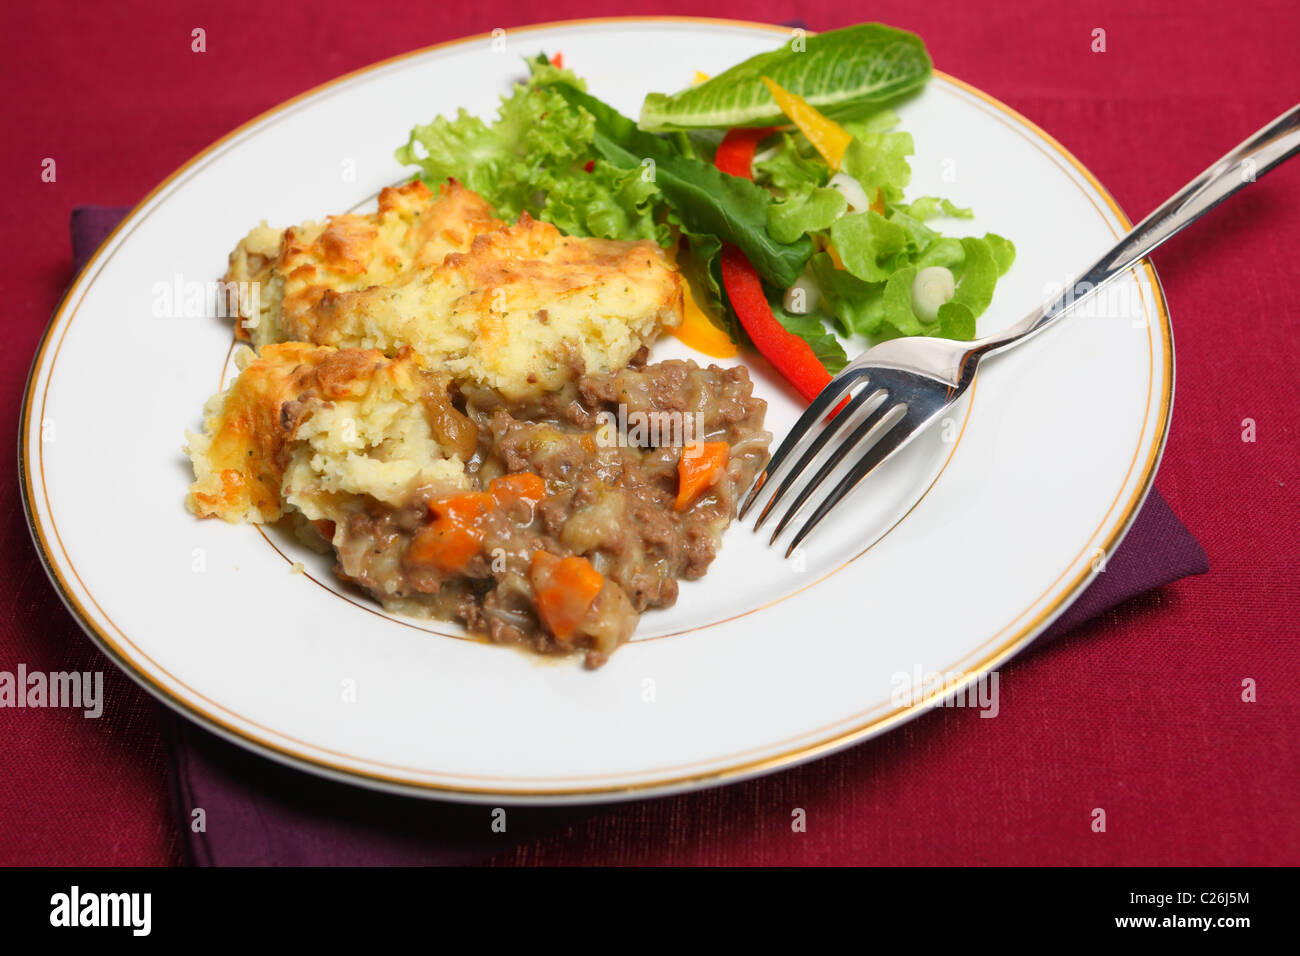 Close Up View Of A Meal Of Shepherd S Pie Minced Meat Stew Topped